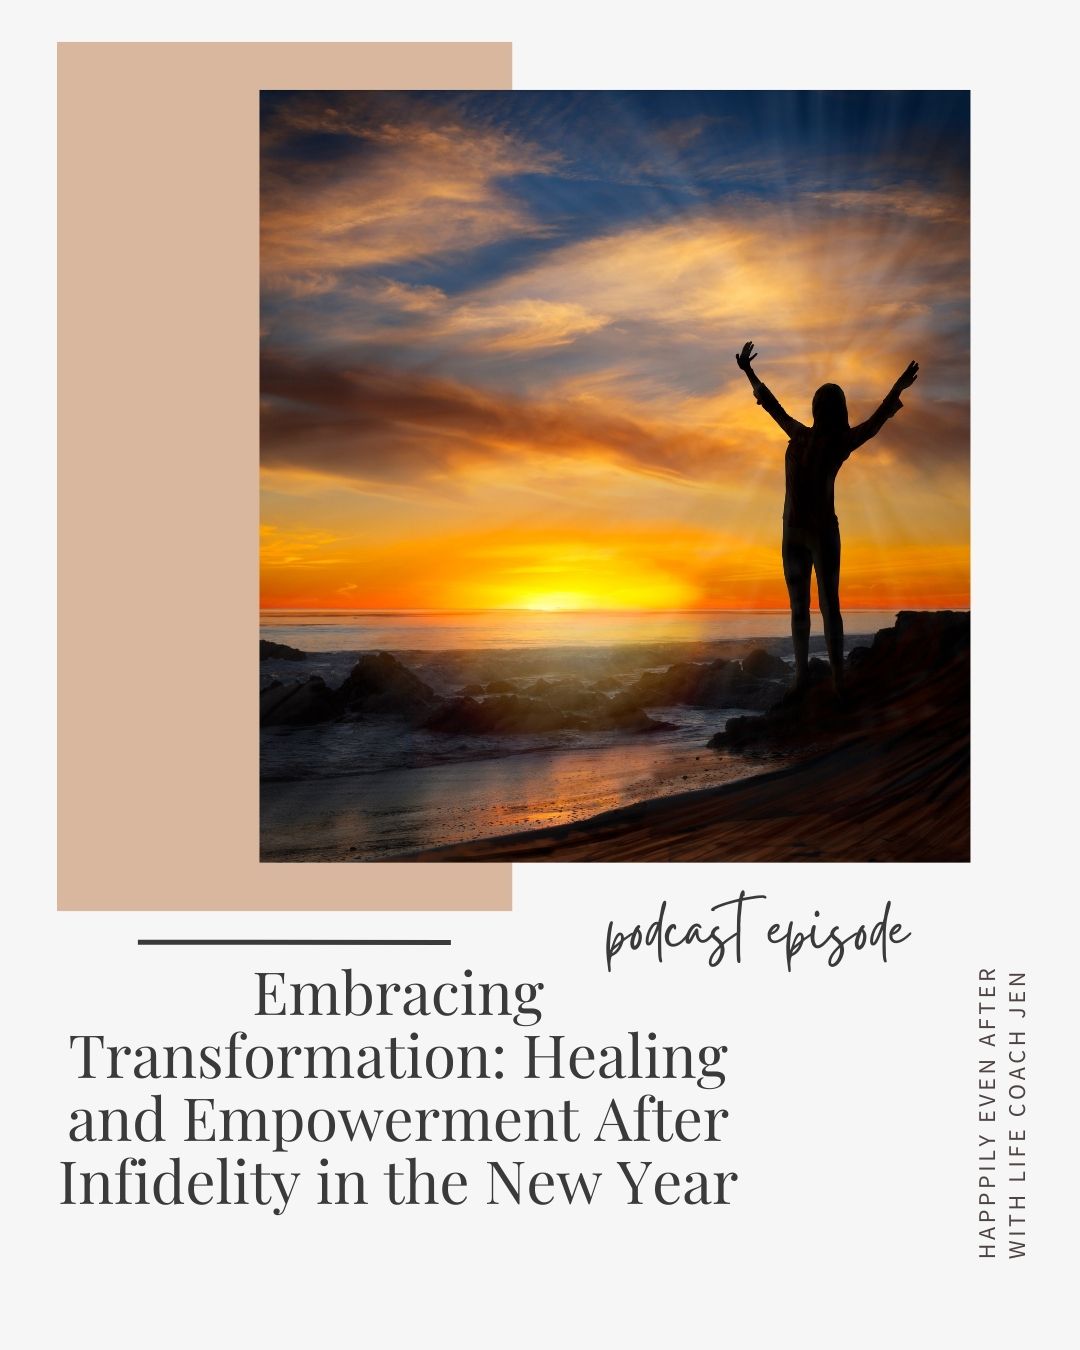 Person with arms raised in victory against a vibrant sunset over the ocean, promoting a podcast episode titled "embracing transformation: healing and empowerment after.